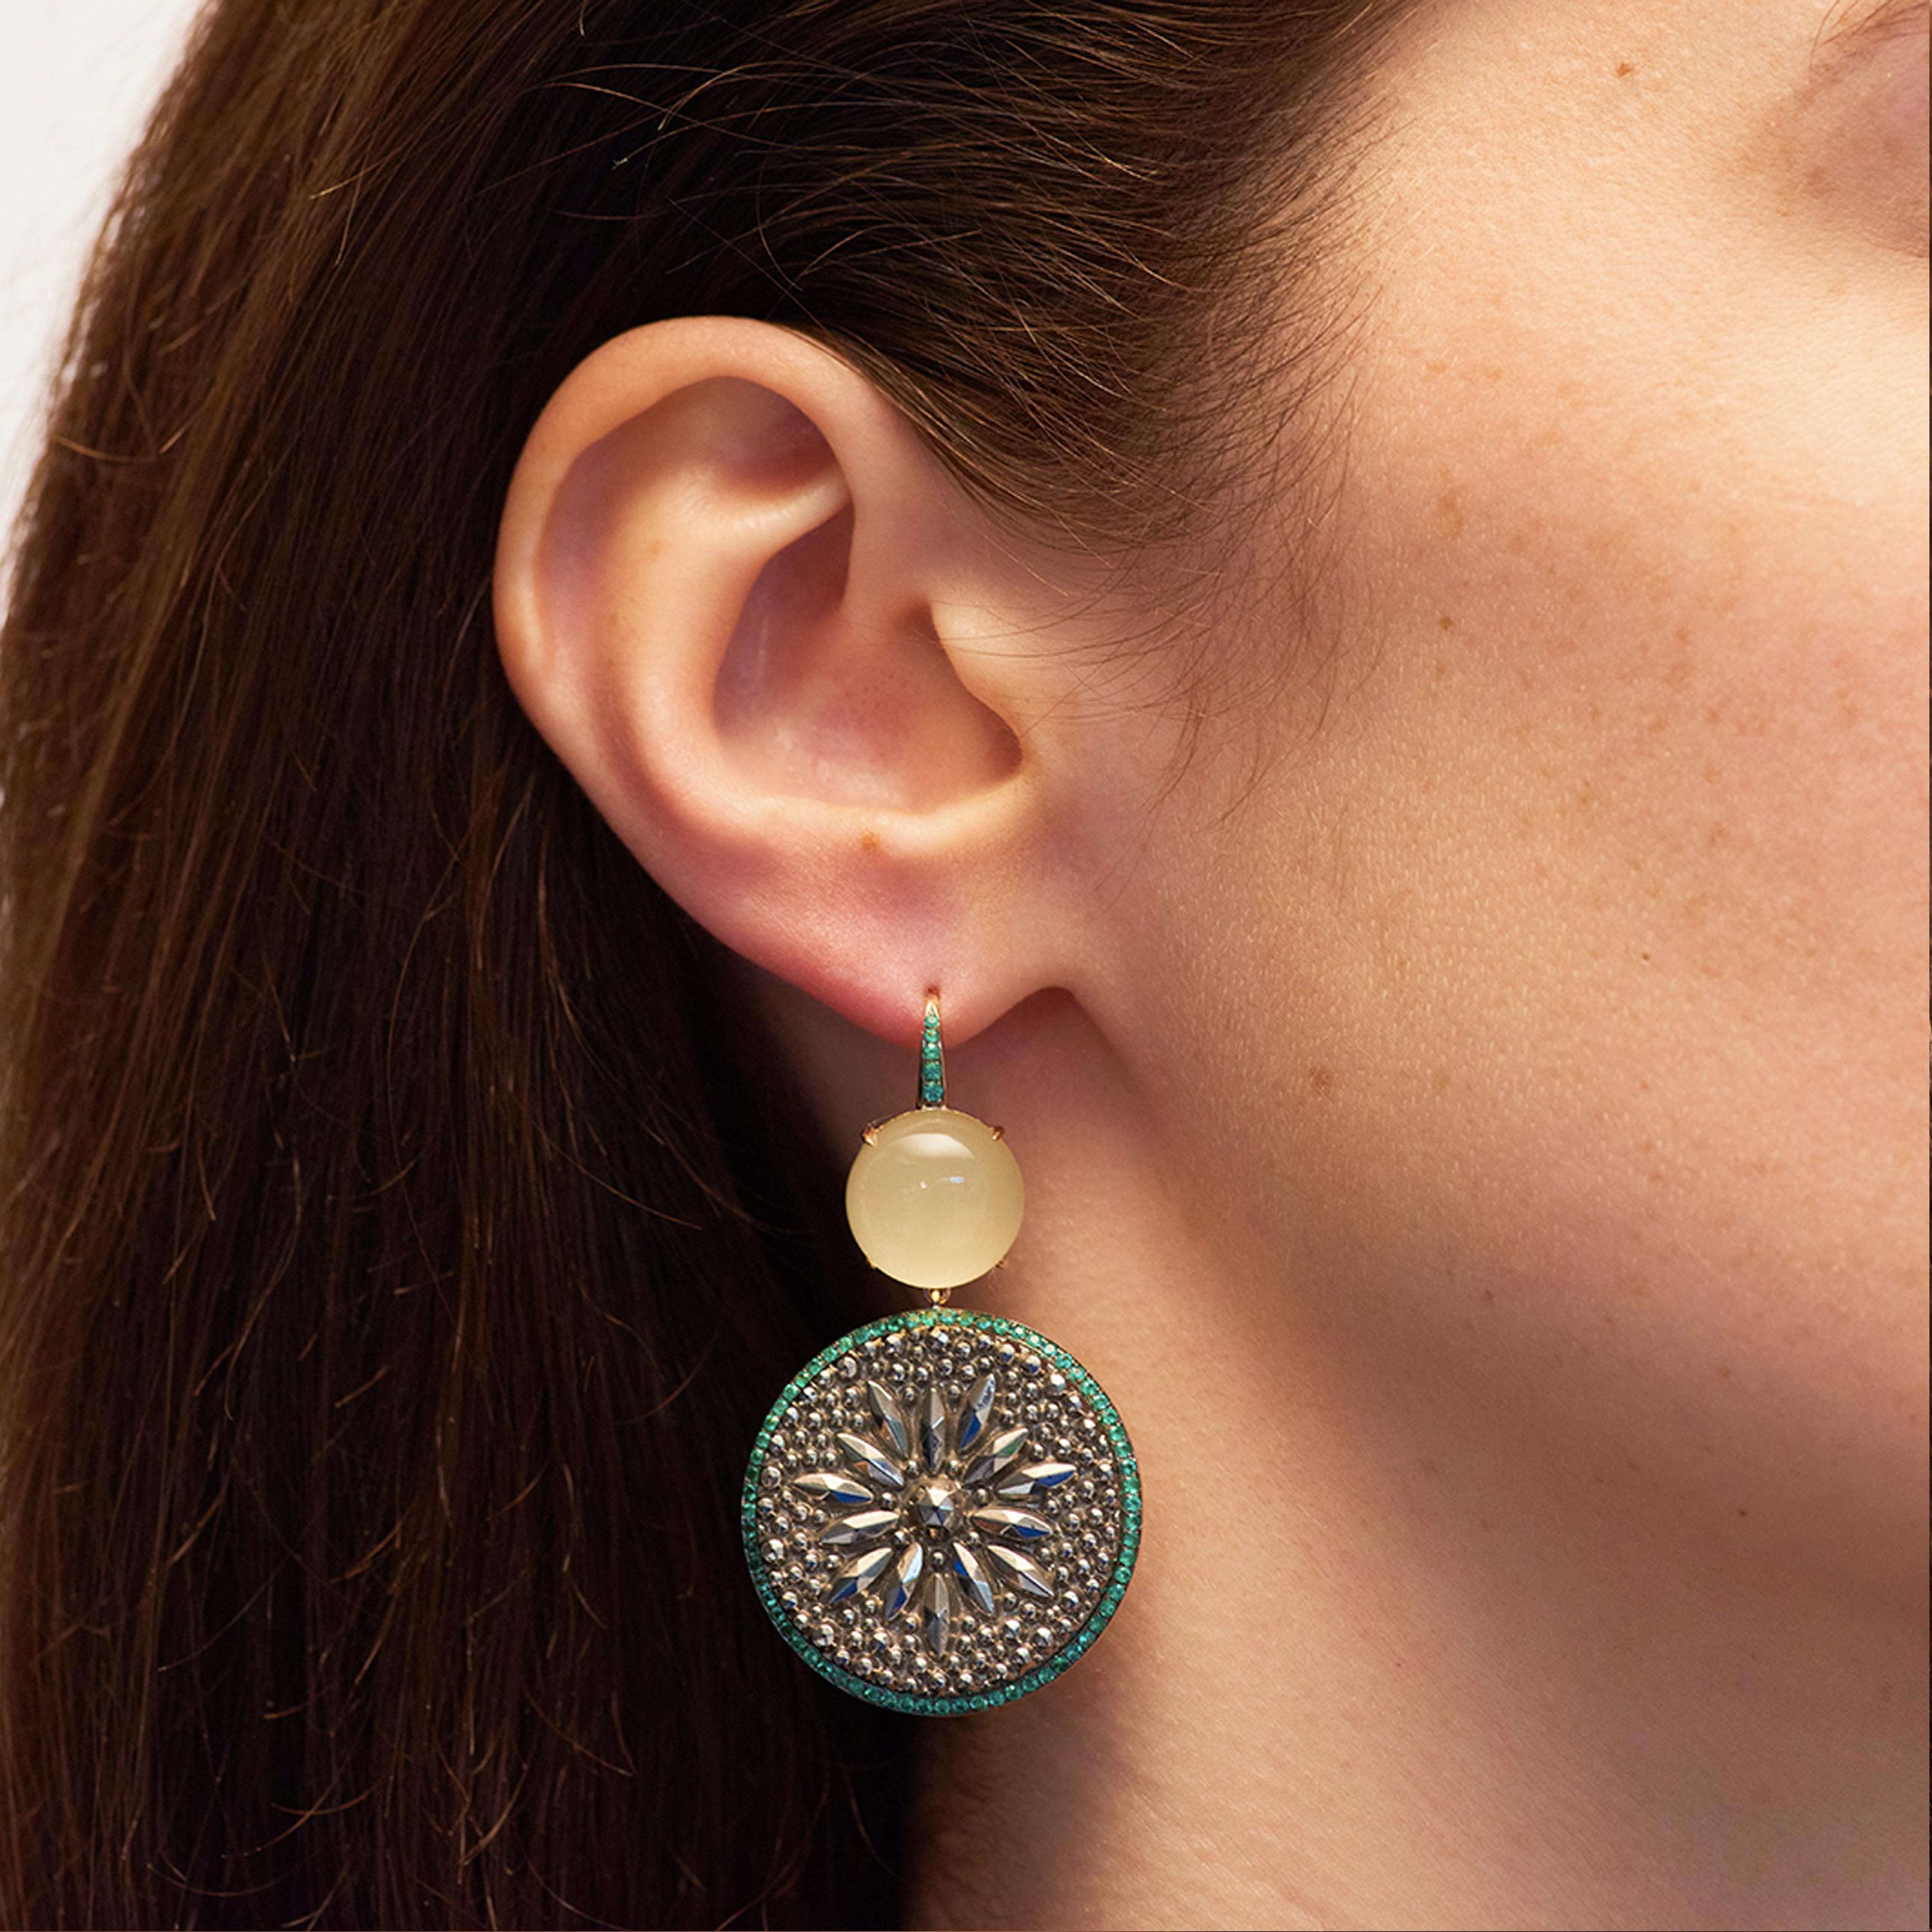 Set in 18 karat yellow gold (27.90g), Francesca Villa's one-of-a-kind earrings are decorated with emeralds (1.0ct) and milky lemon quartz cabochons (17.05cts). Francesca Villa's creation combines two vintage buttons of different origins. A black